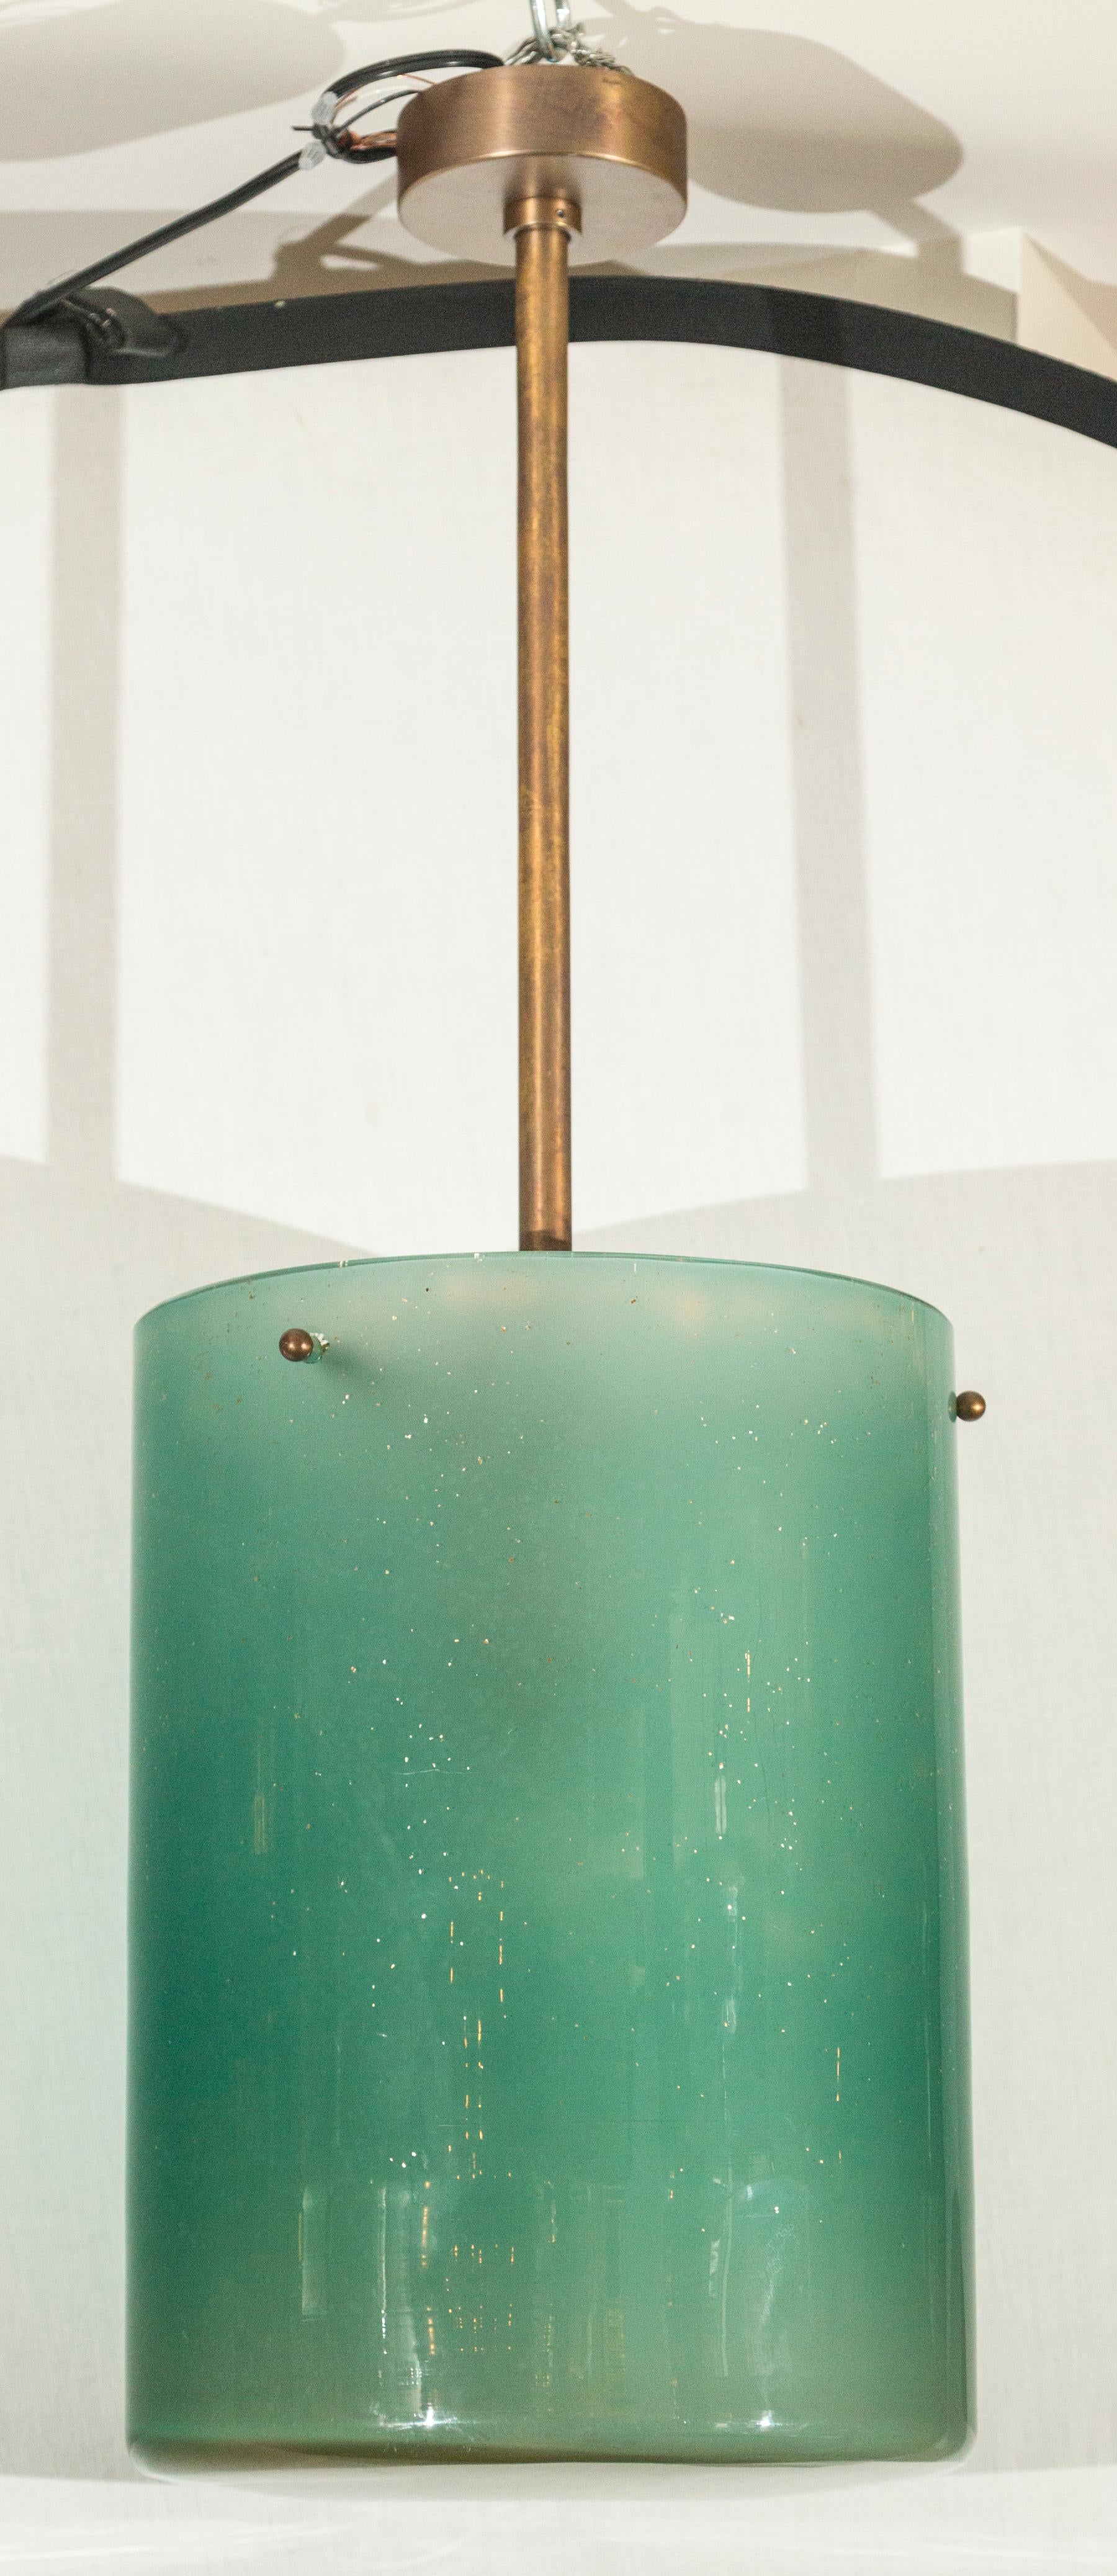 Two unique large blown jar style pendants/ lanterns in a ever changing aqua fume color speckled with gold and silver mica to create an organic modern effect
Hardware in a rustic dark antiqued brass finish
Note each glass weighs 44lbs and this is